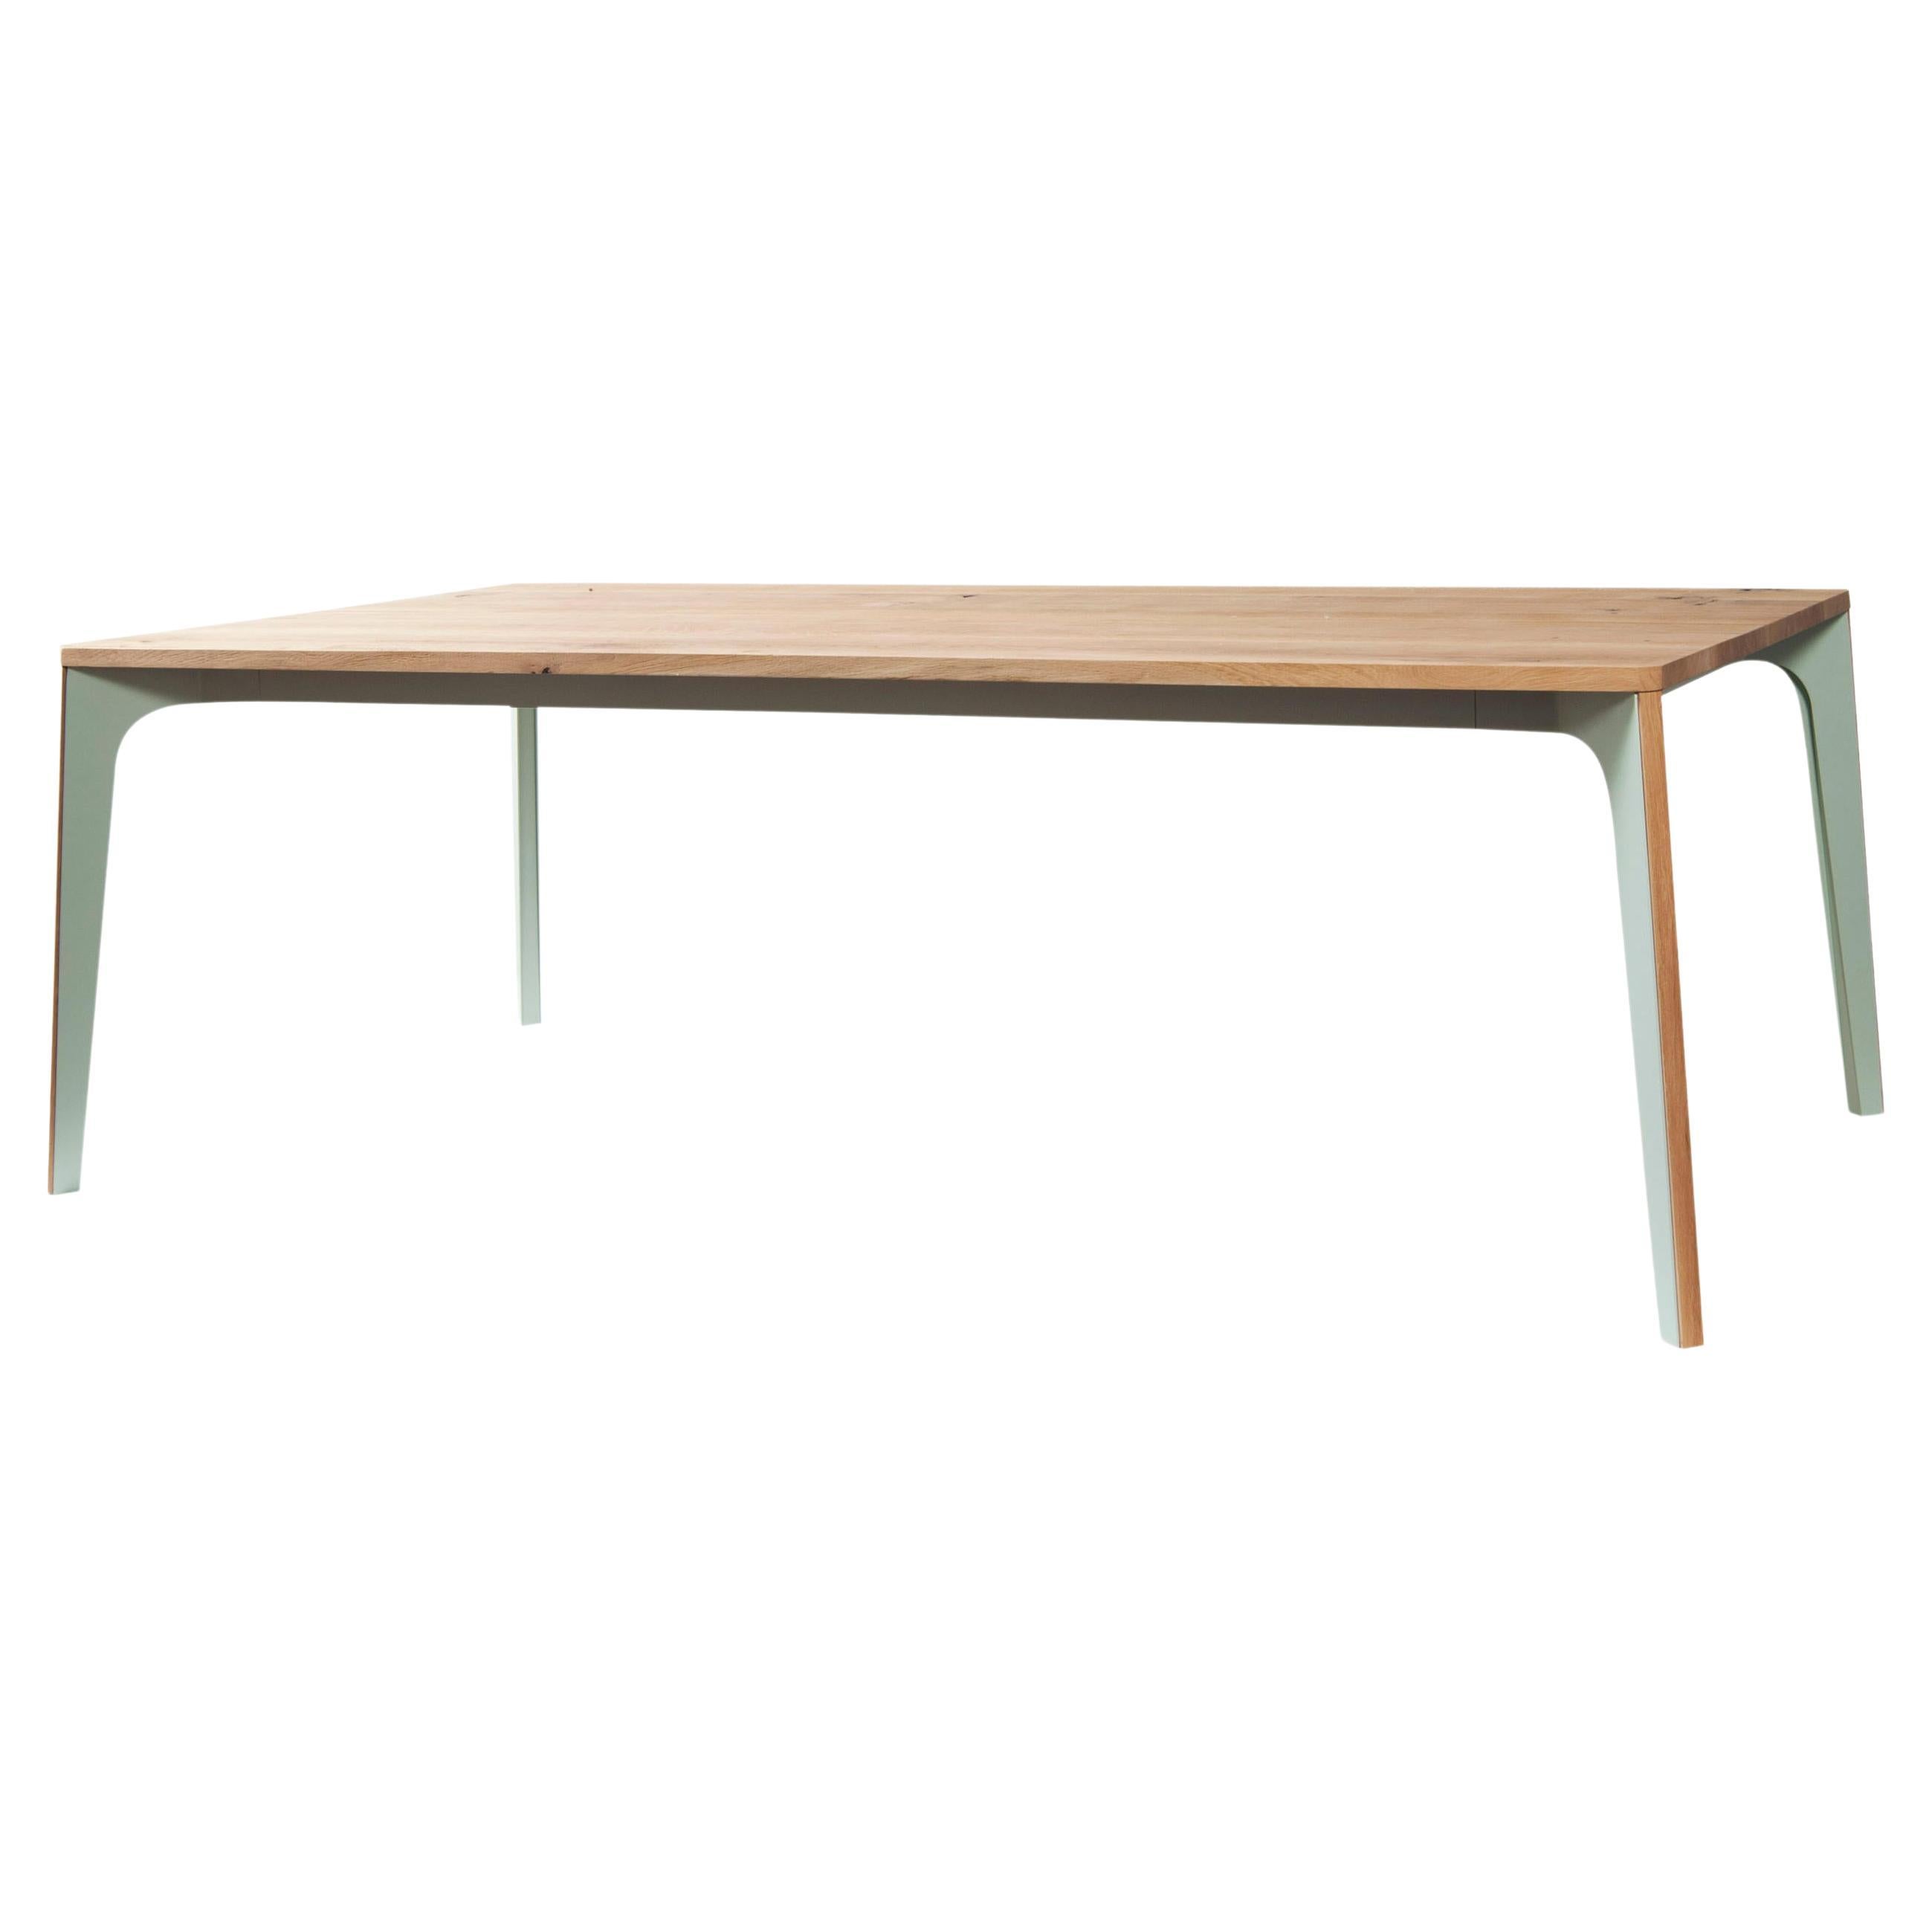 This dining table has a metal structure and a wooden top. There is a wooden profile on the edge of each leg. 
Top : veneer oak.
Available in different sizes and different materials such as Solid Oak, Solid Walnut, Lacquered and Veneer Walnut.
The